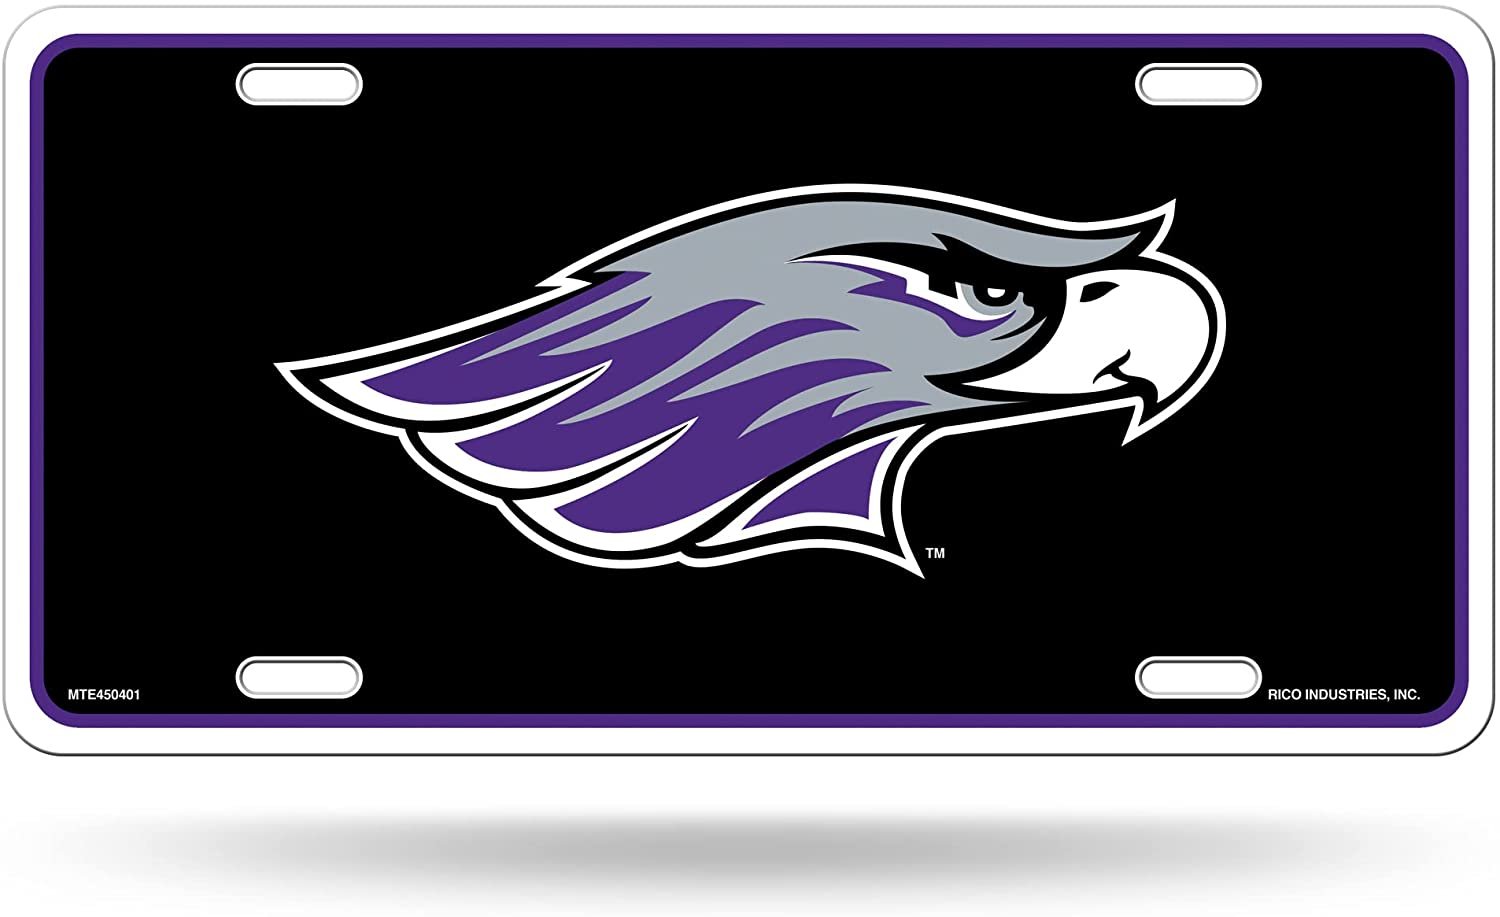 University of Wisconsin Whitewater Warhawks Metal Auto Tag License Plate, Hawk Design, 6x12 Inch